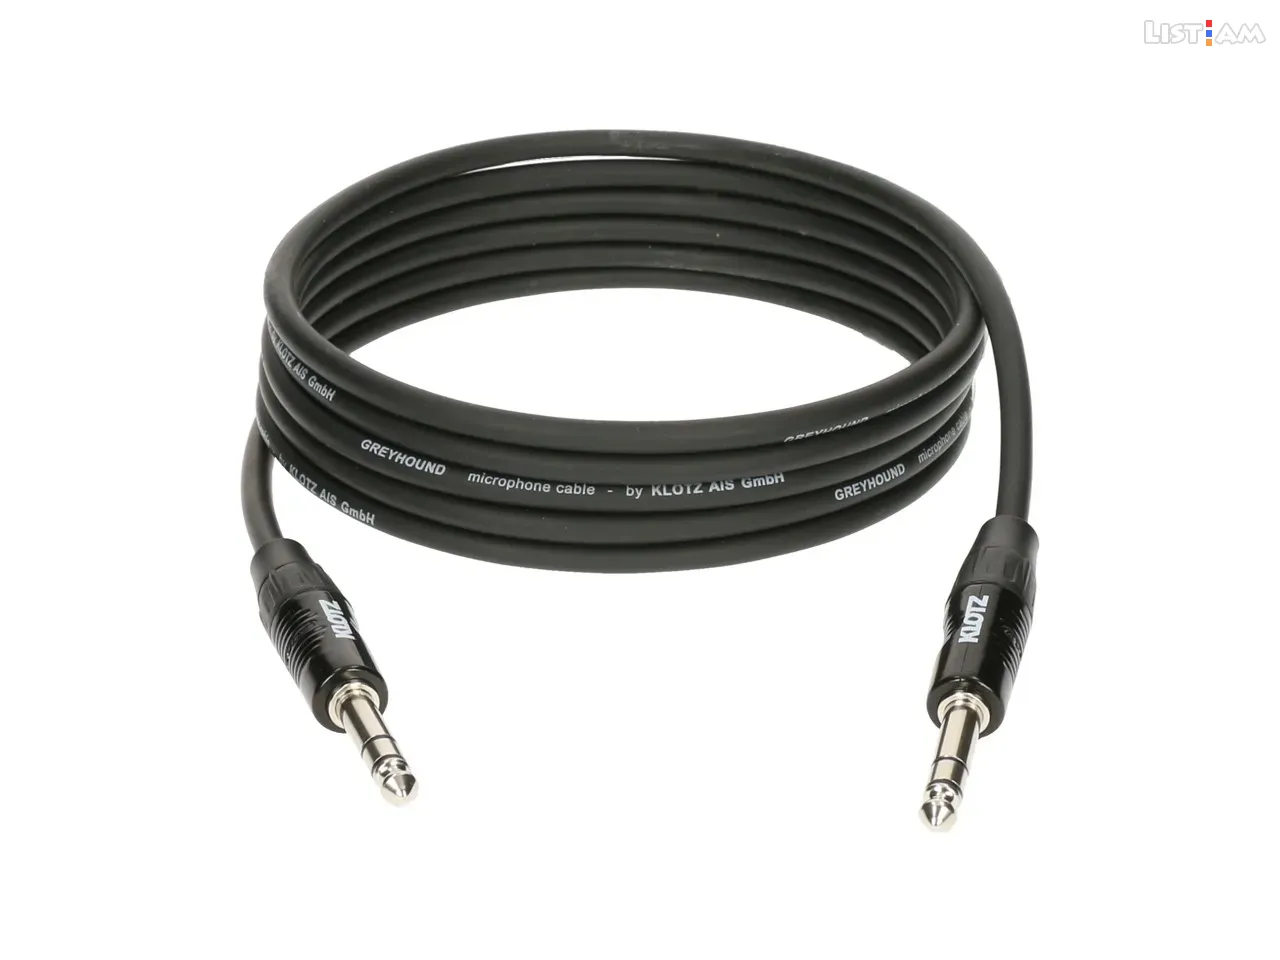 Klotz GRG1FM05.0 Greyhound Microphone Cable 5 m favorable buying at our shop